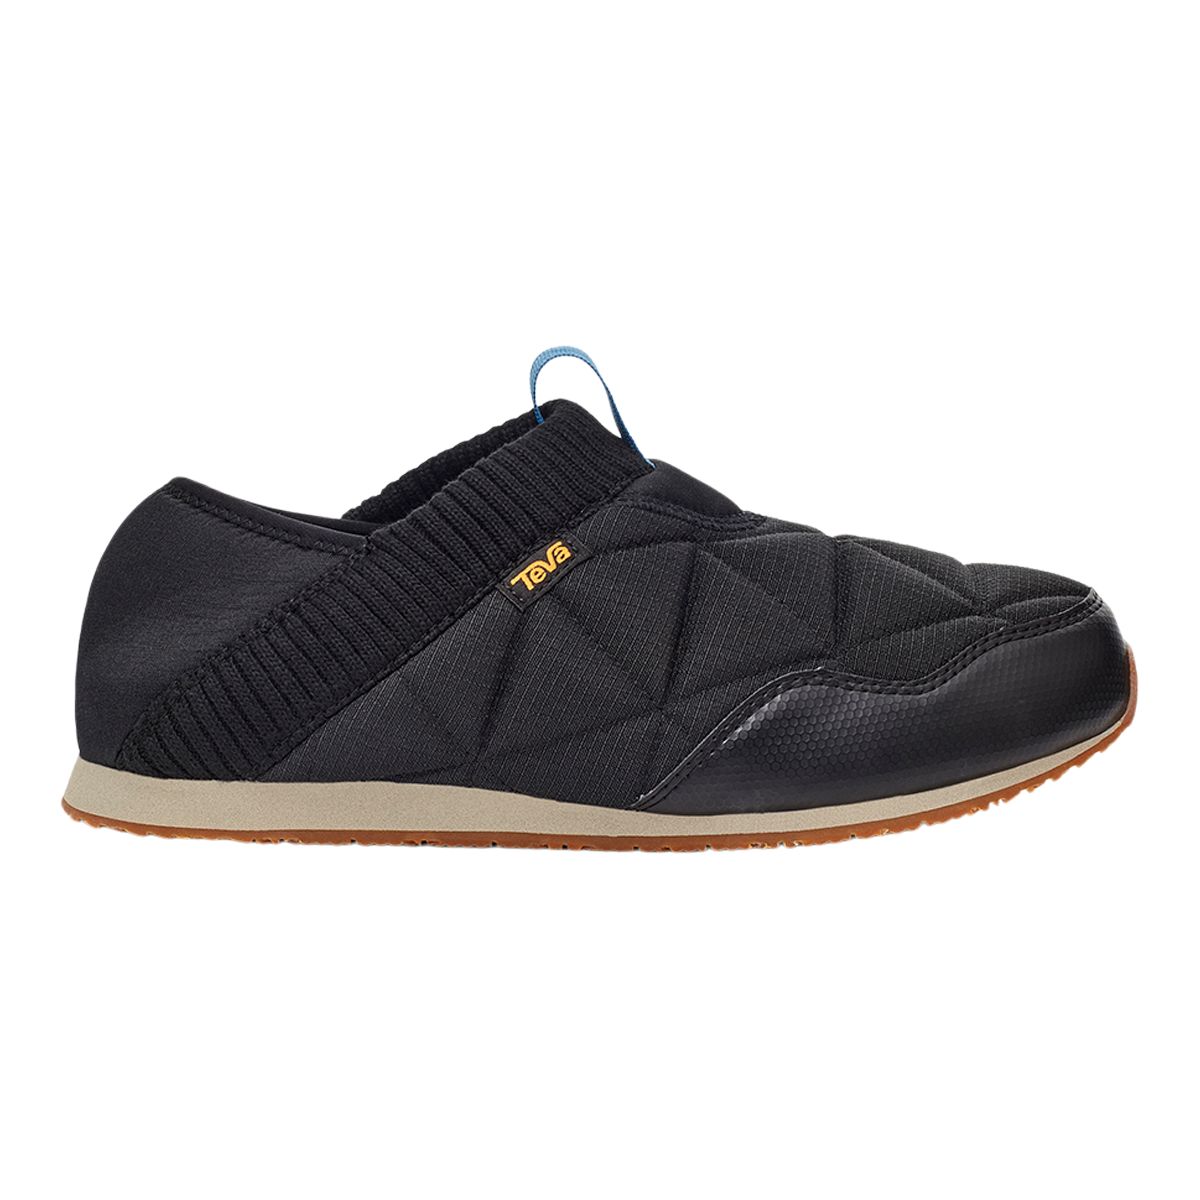 Image of Teva Men's ReEmber Quilted Slip On Shoes